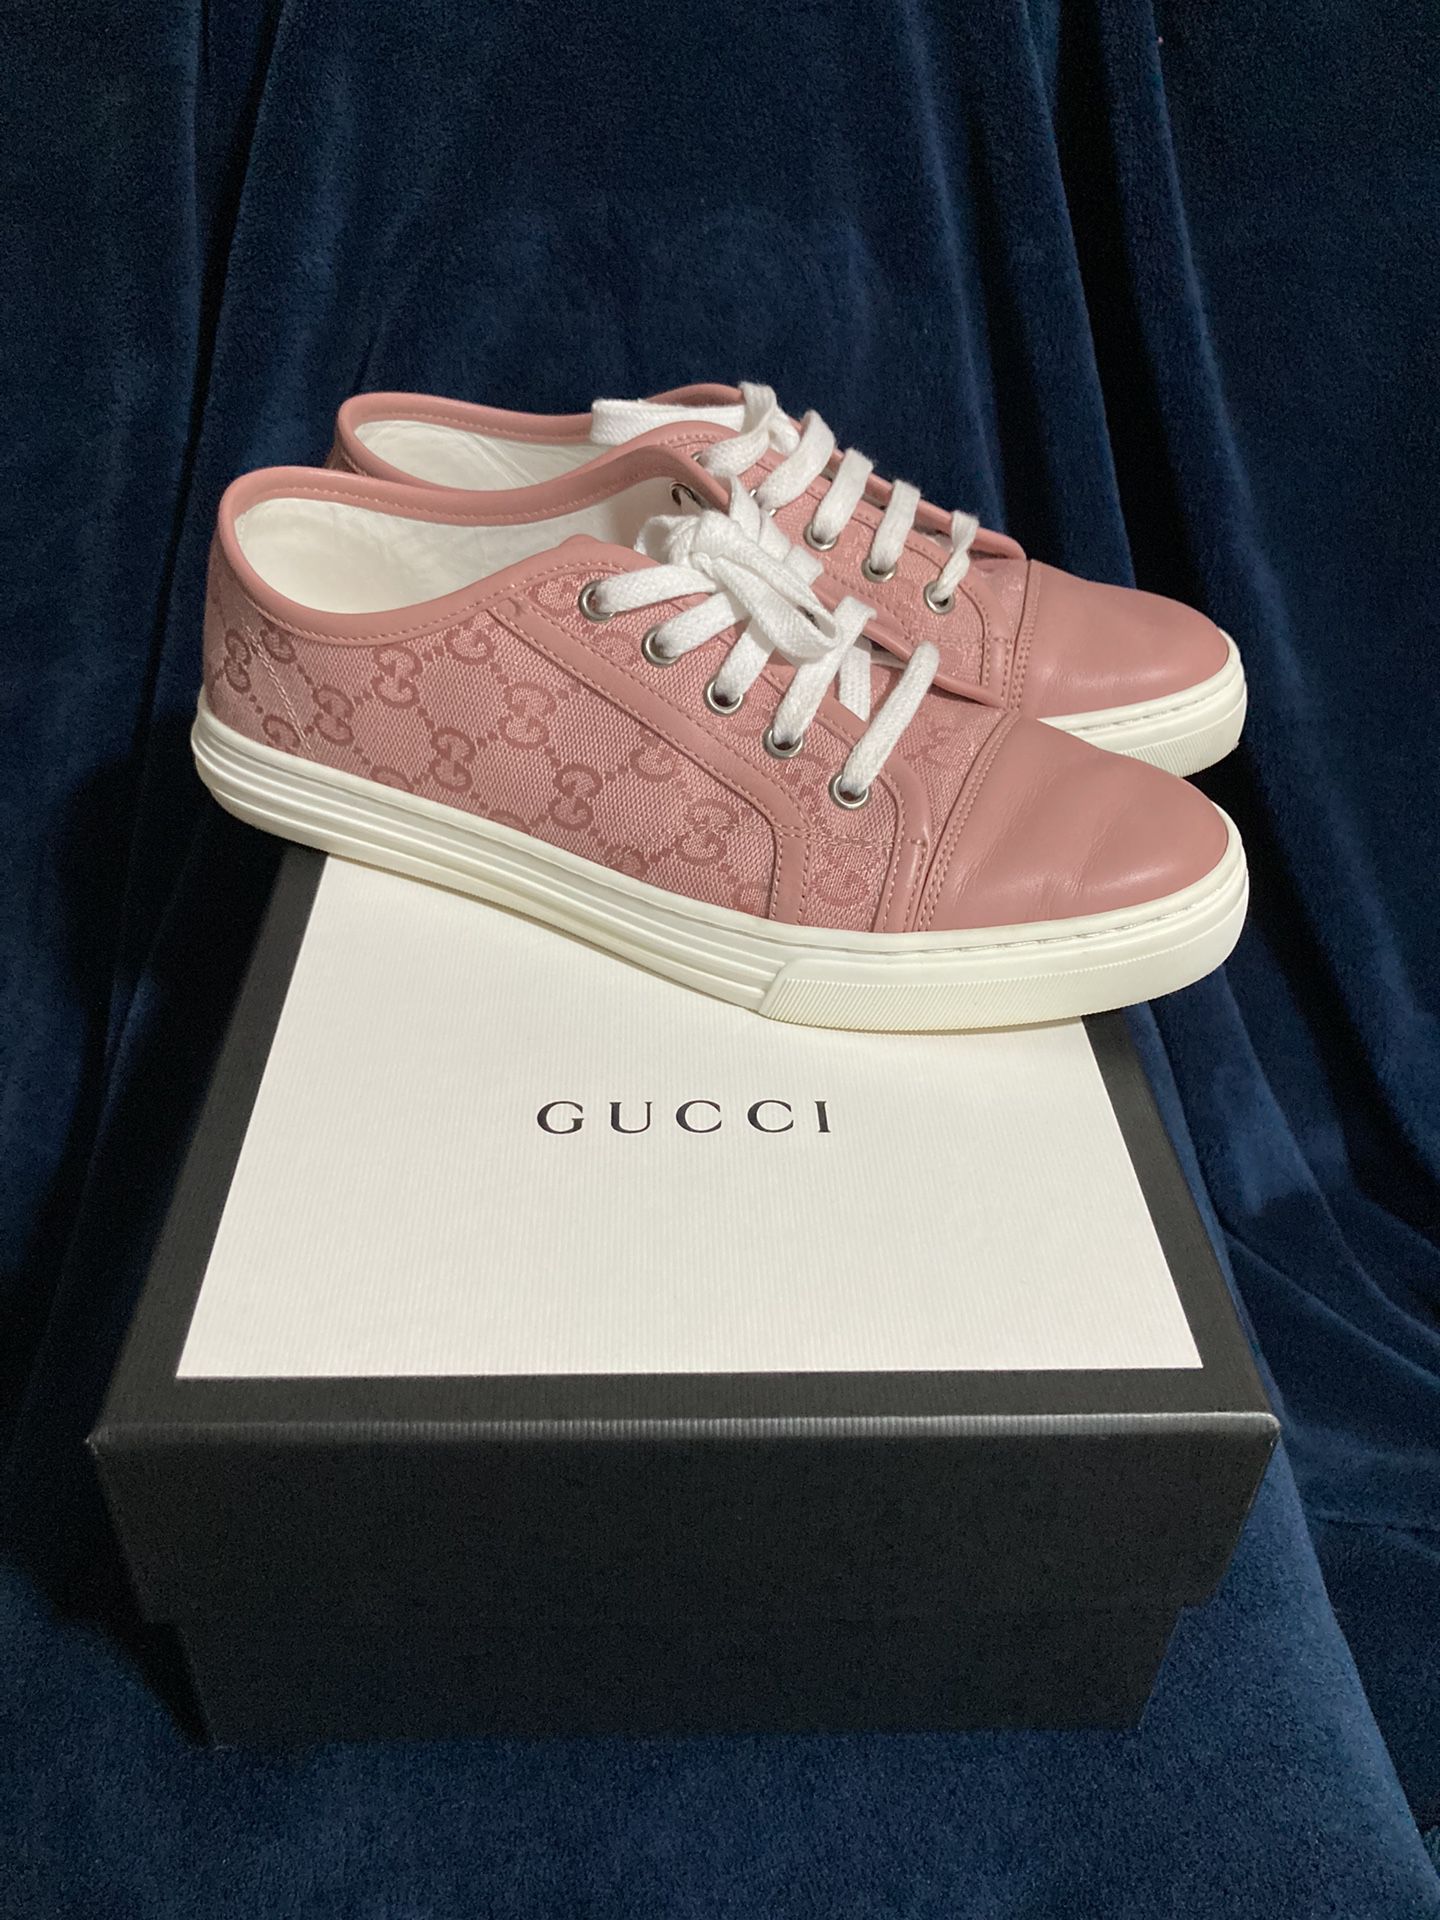 Gucci Women’s Leather & Canvas Low Cut Sneakers (pink)